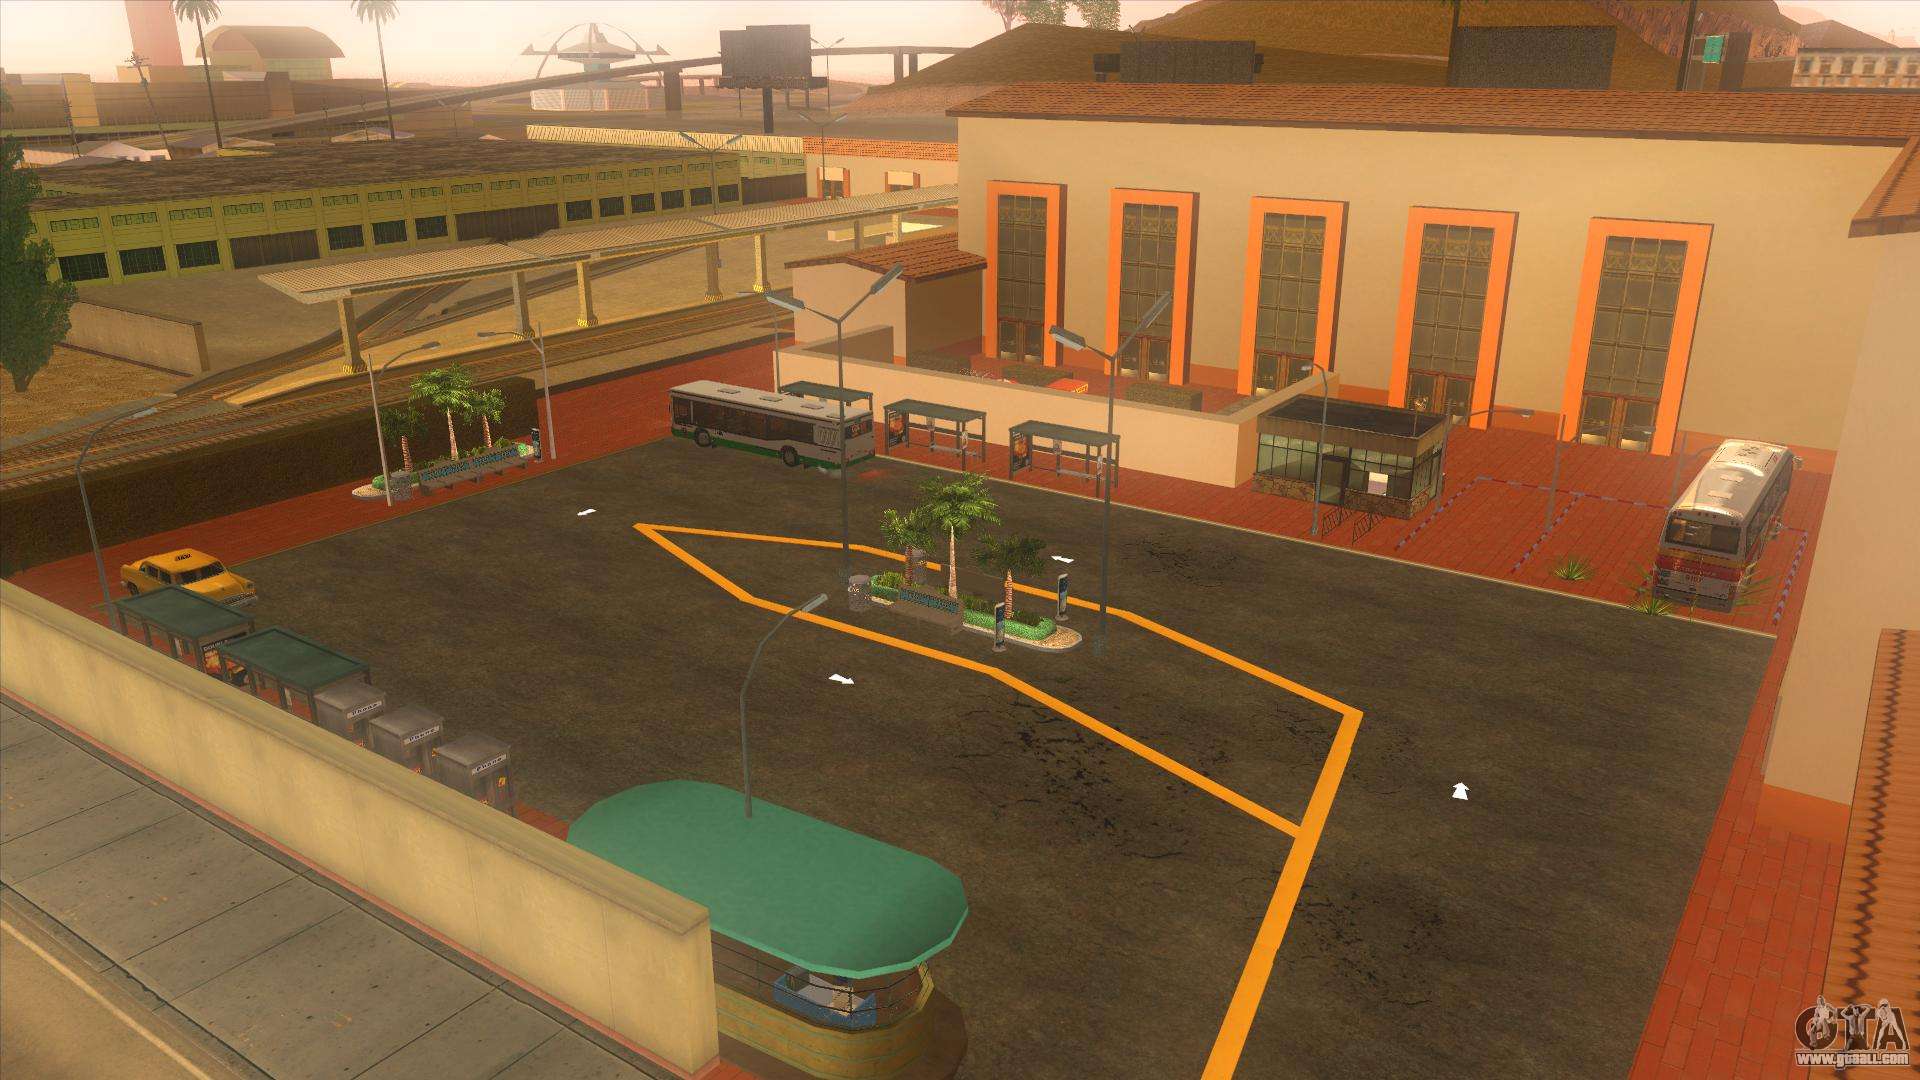 gta 5 unity download for android